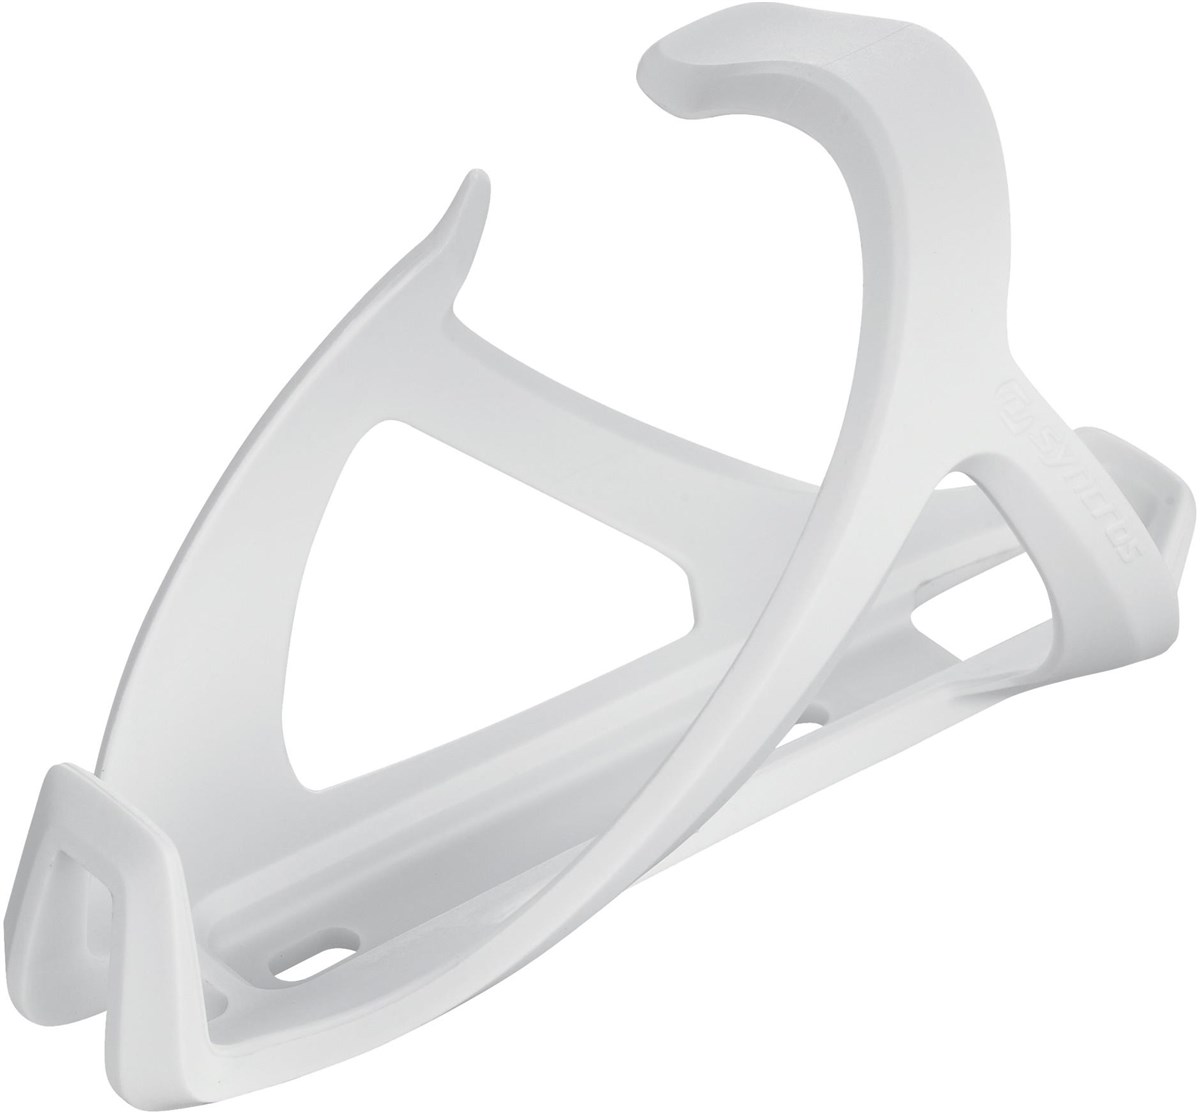 Syncros Tailor Cage 3.0 Left Bottle Cage product image